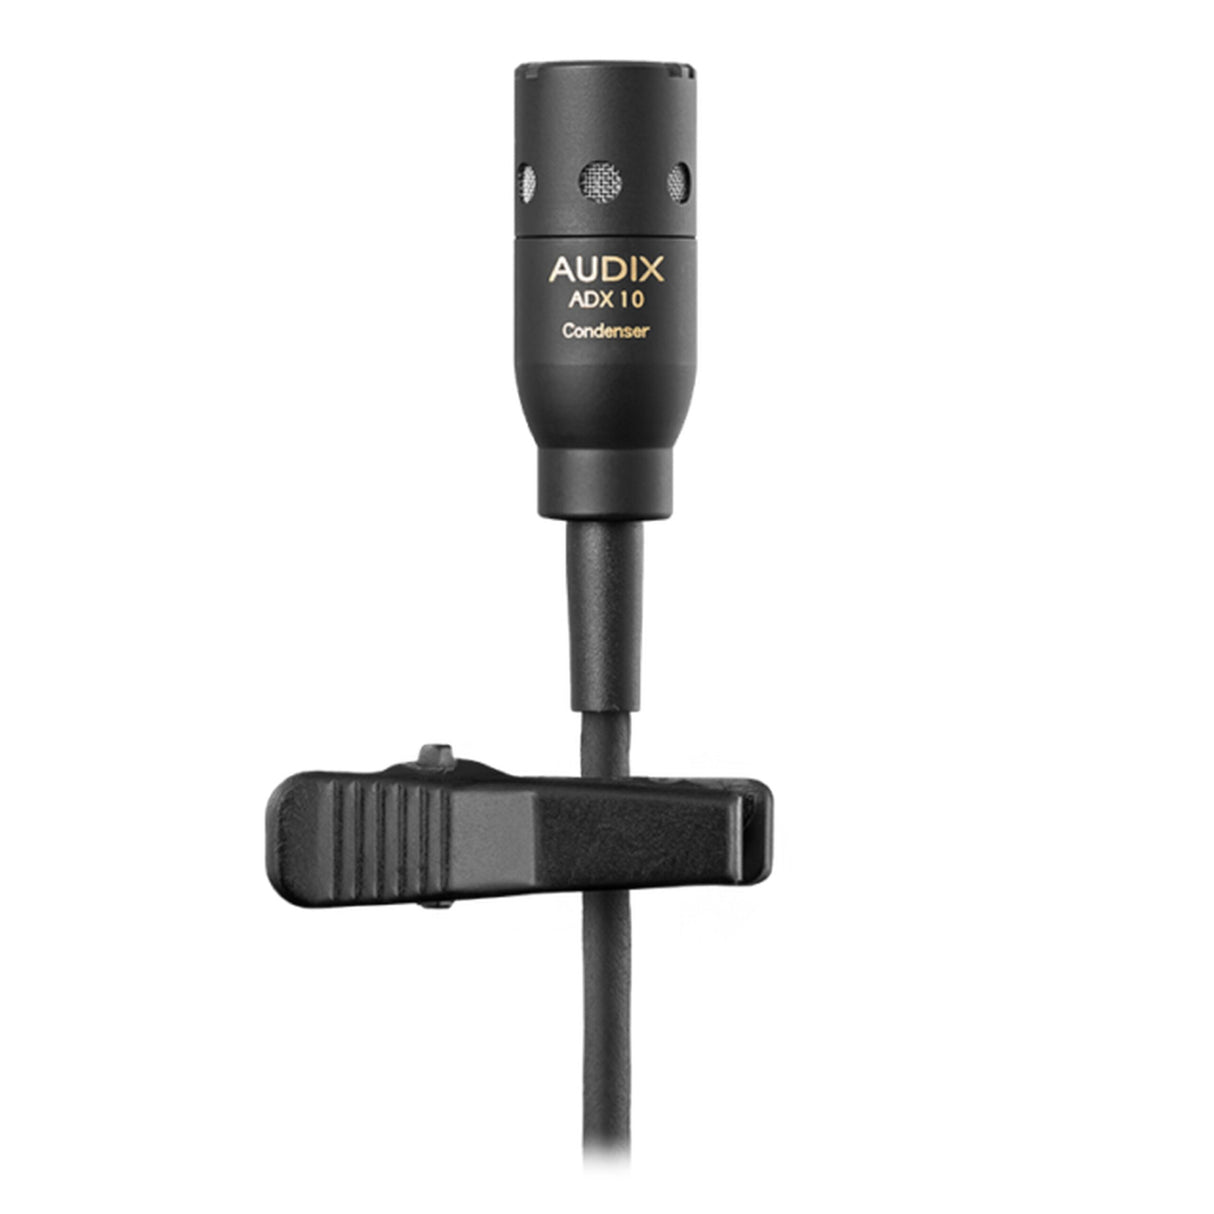 Audix AP62 C210 Combo Wireless Microphone System, 522 - 586 MHz